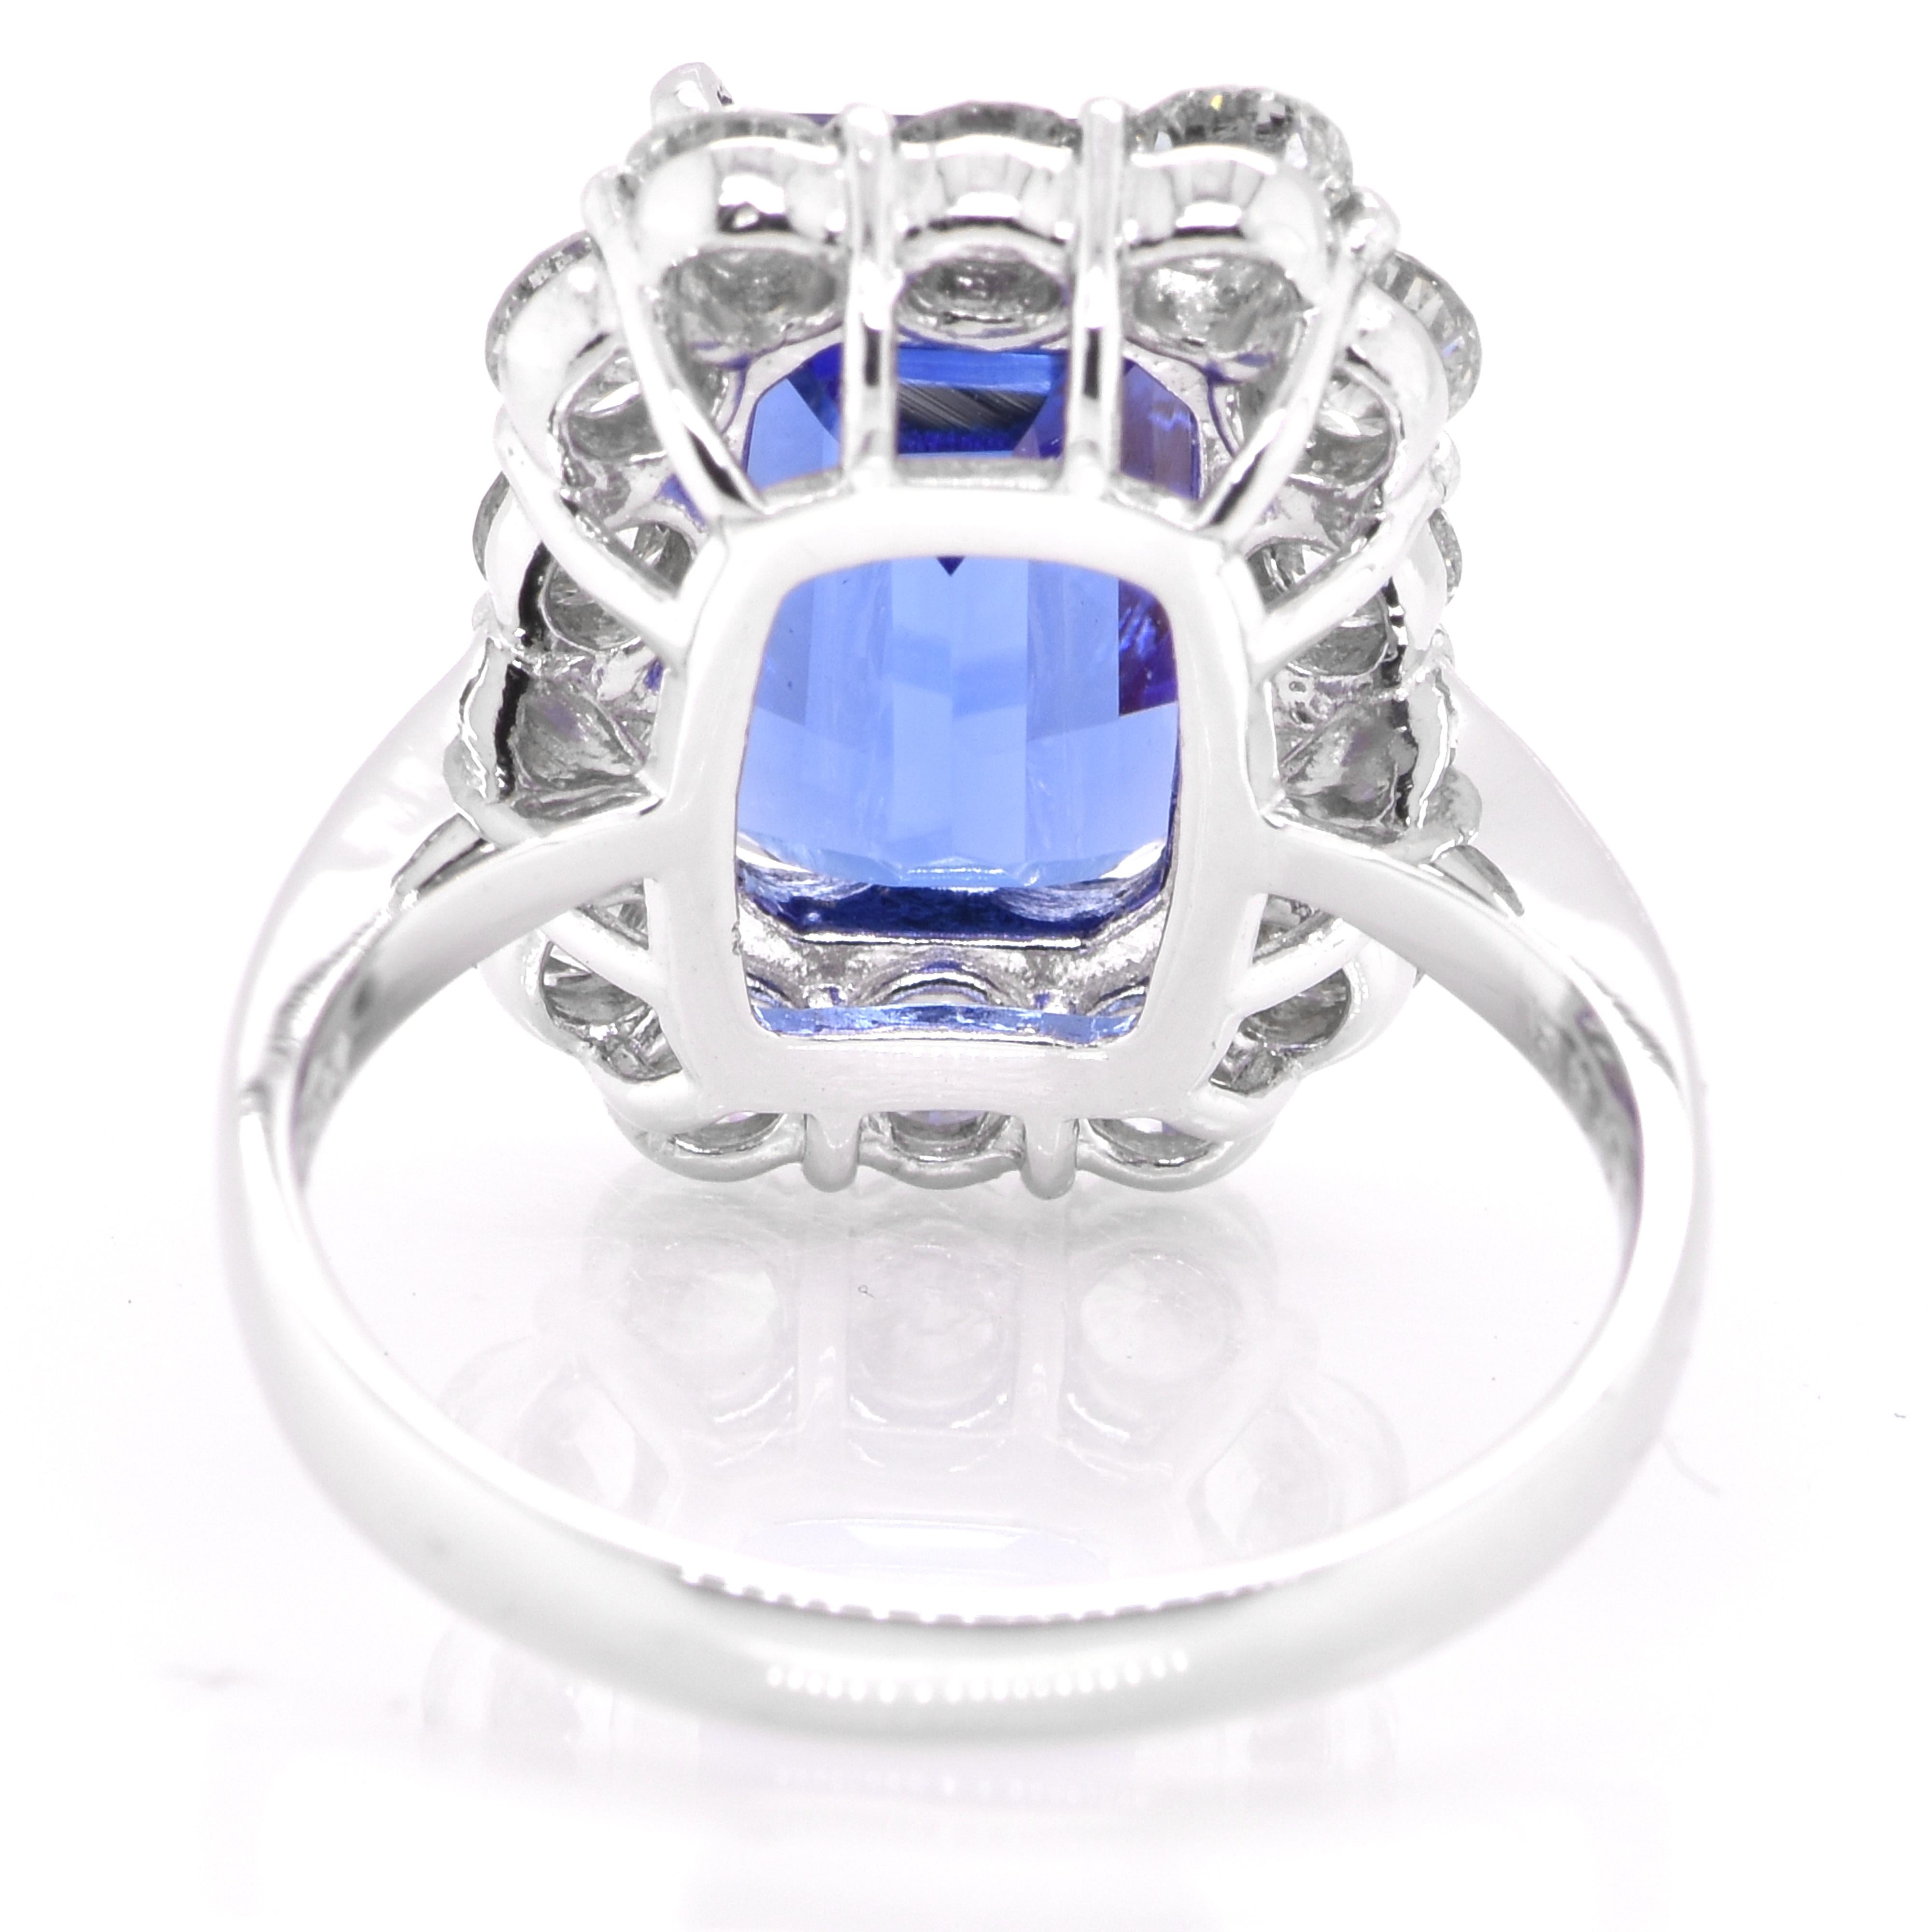 Women's 5.58 Carat Natural Octogon Tanzanite and Diamond Cocktail Ring Set in Platinum For Sale